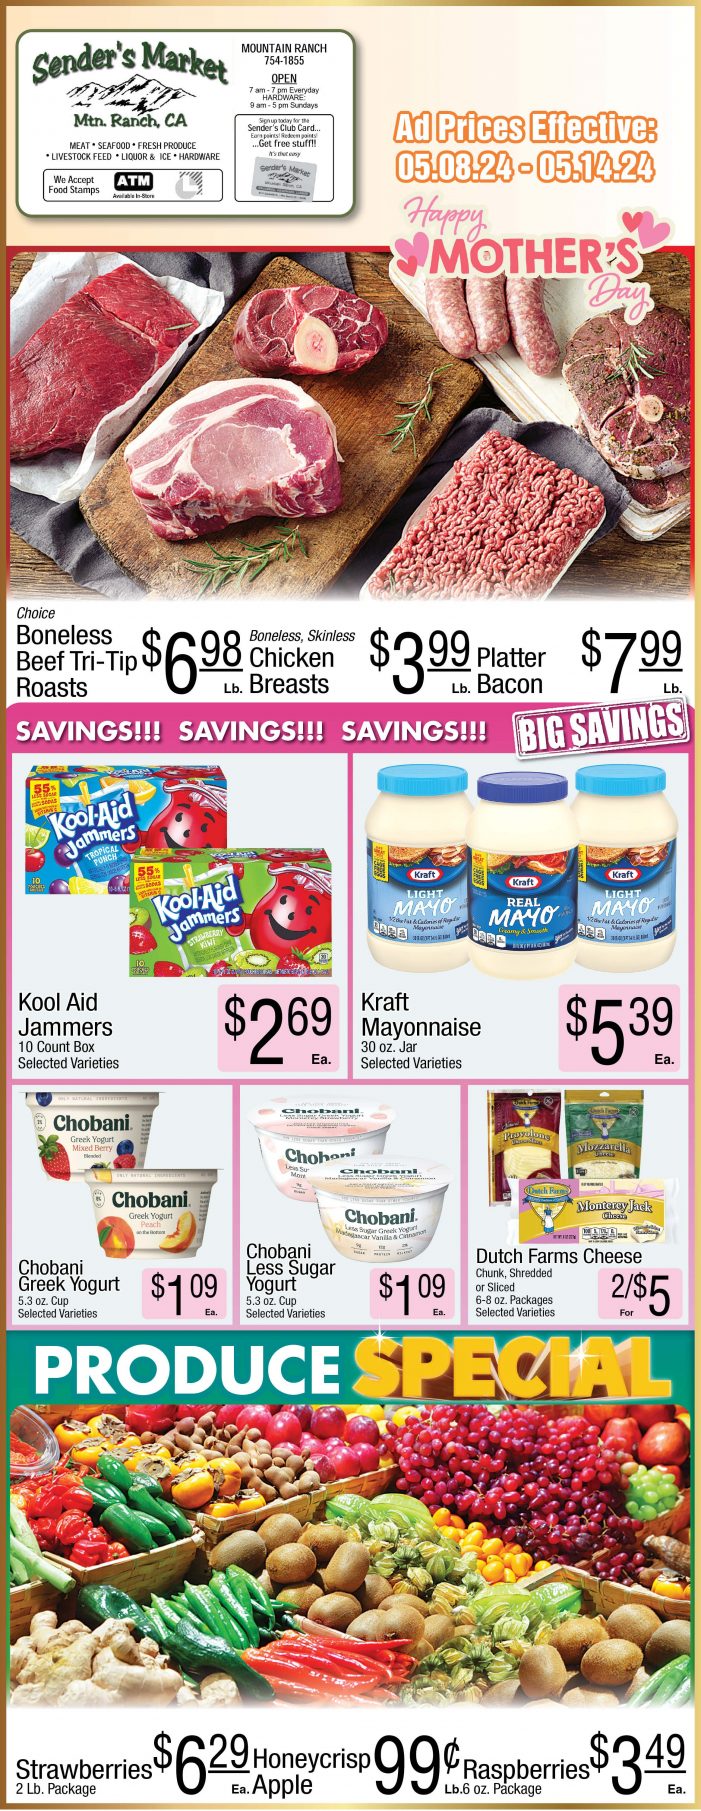 Sender’s Market Weekly Ad & Grocery Specials Through May 14th! Shop Local & Save!!